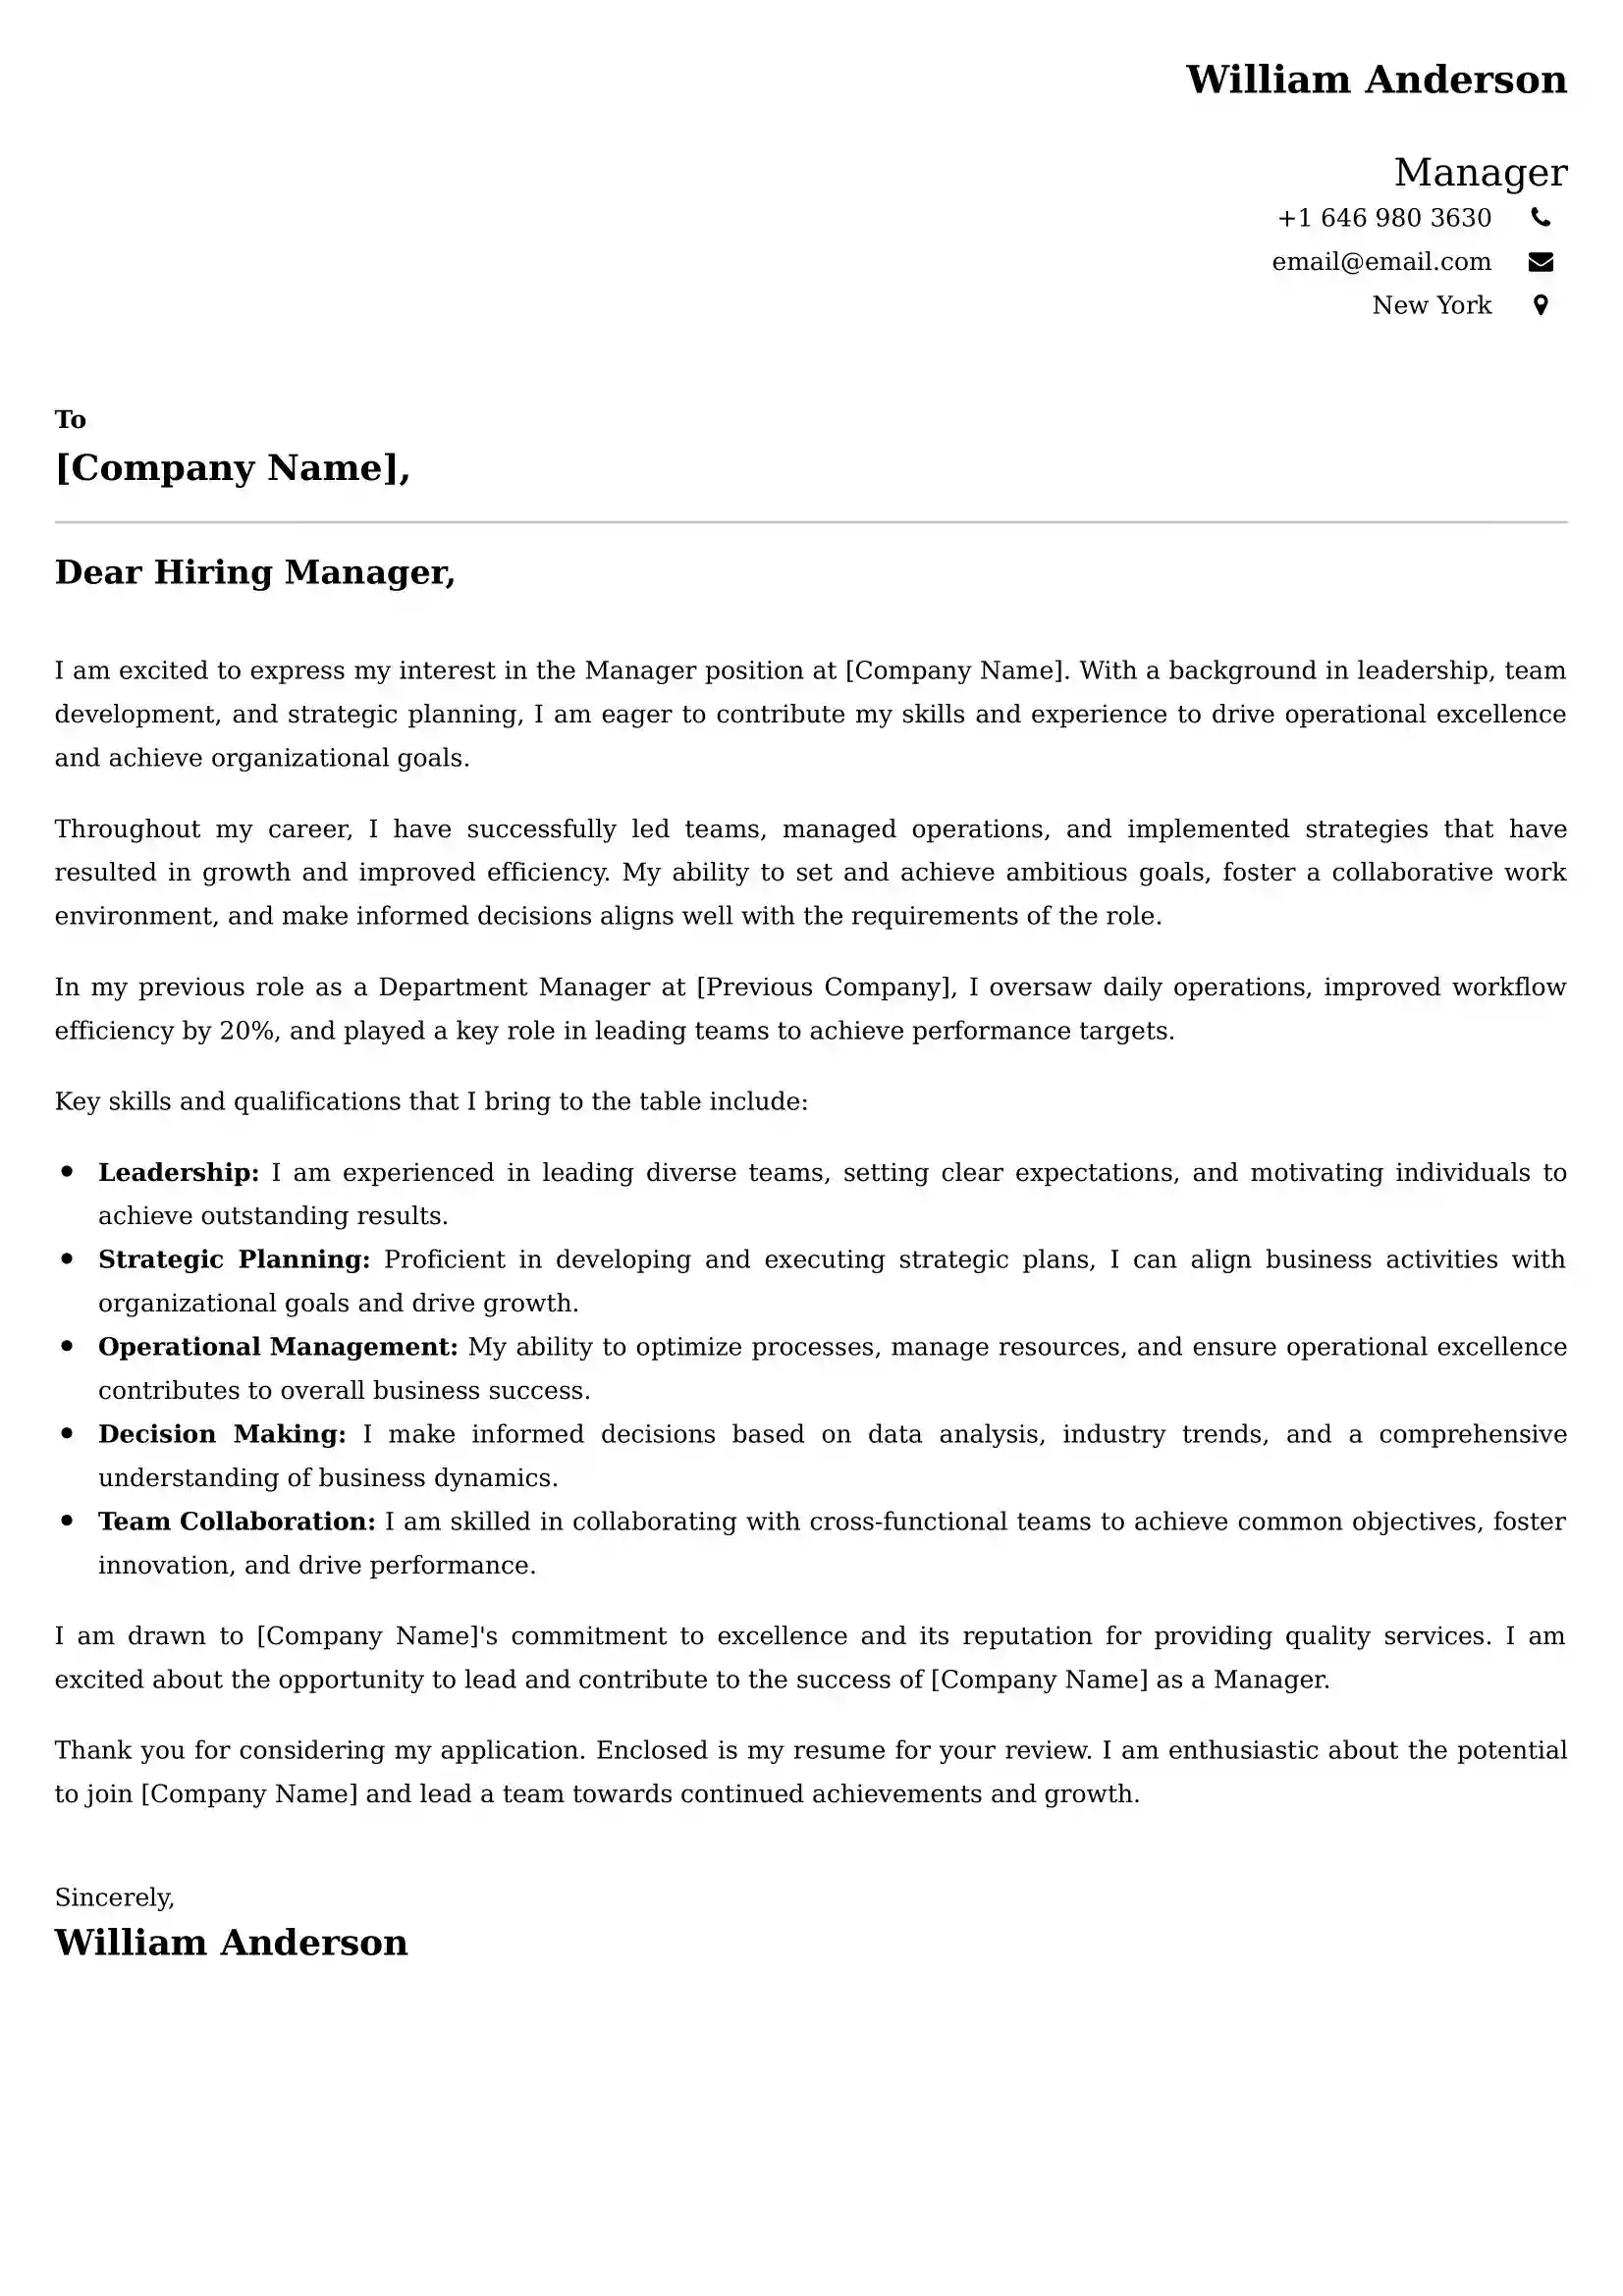 Manager Cover Letter Examples - Latest UK Format